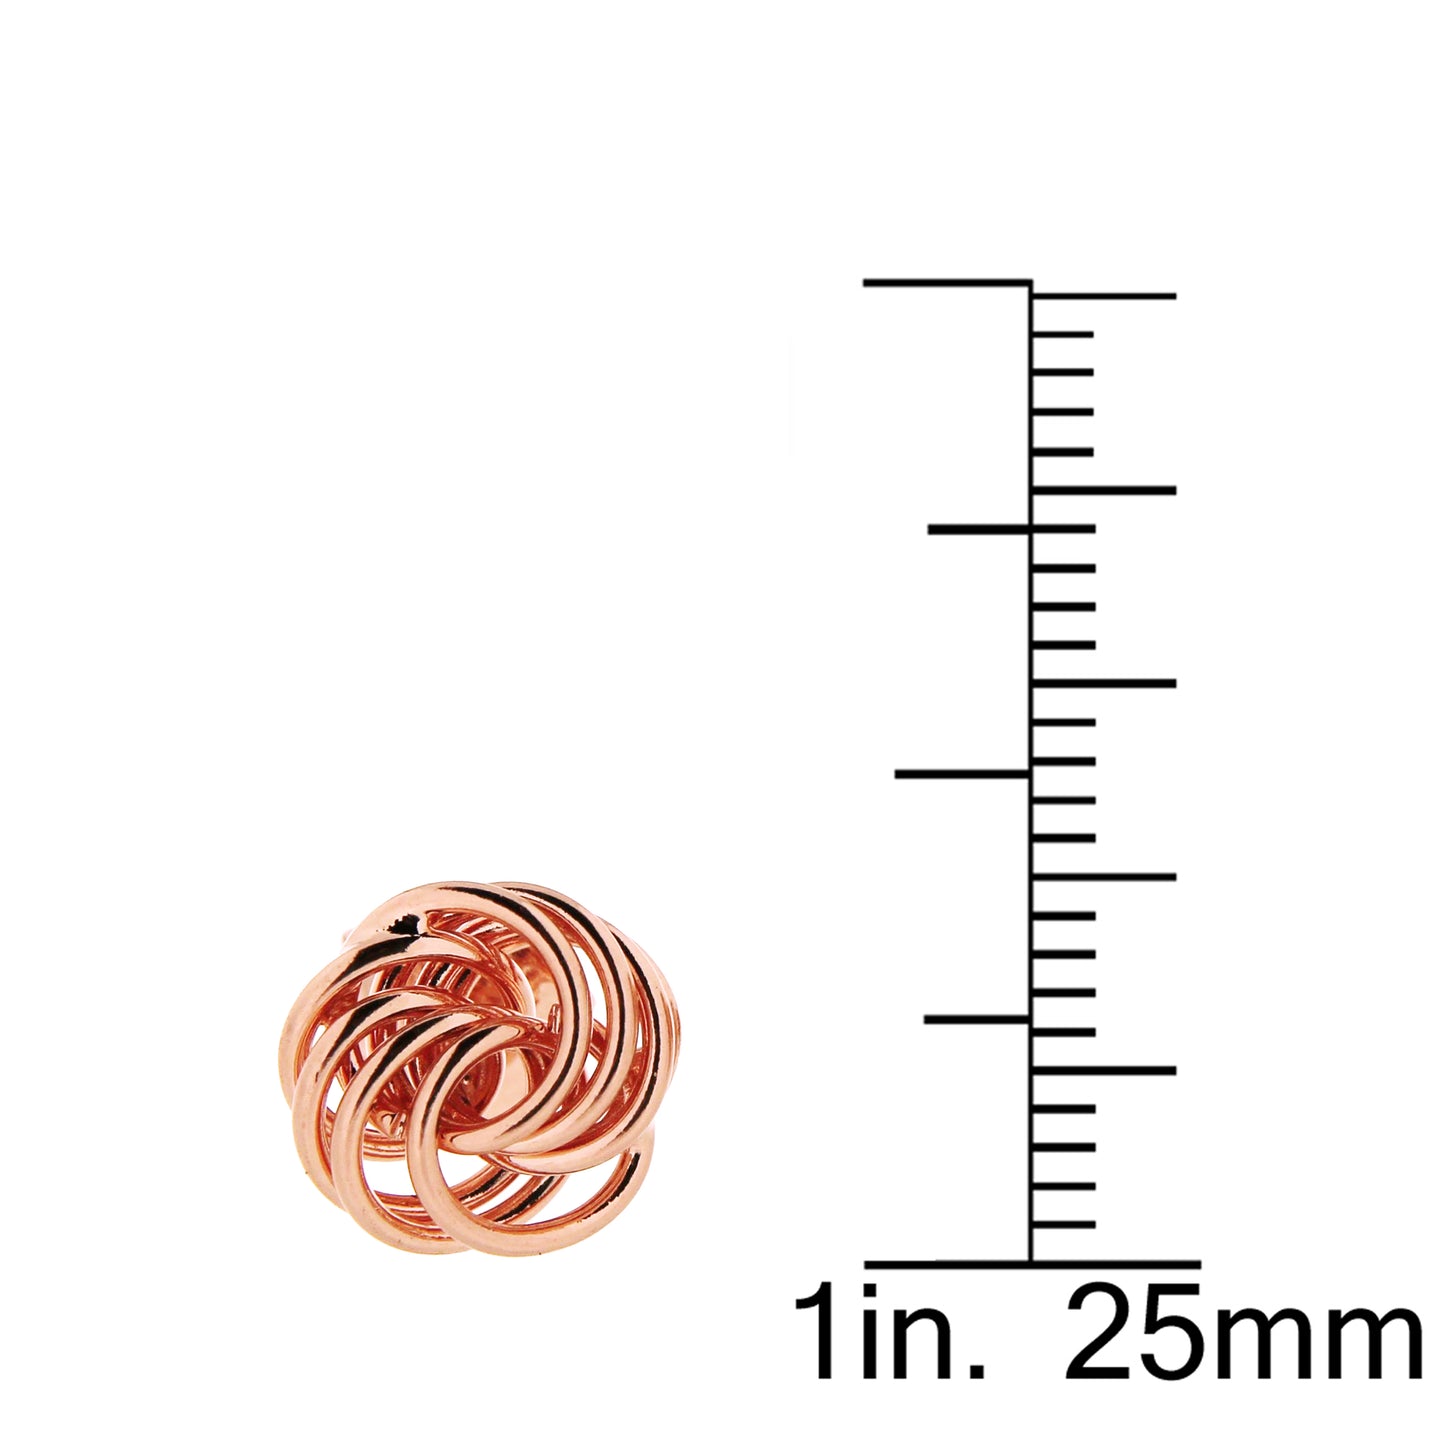 Love Knot Rose Gold Studs